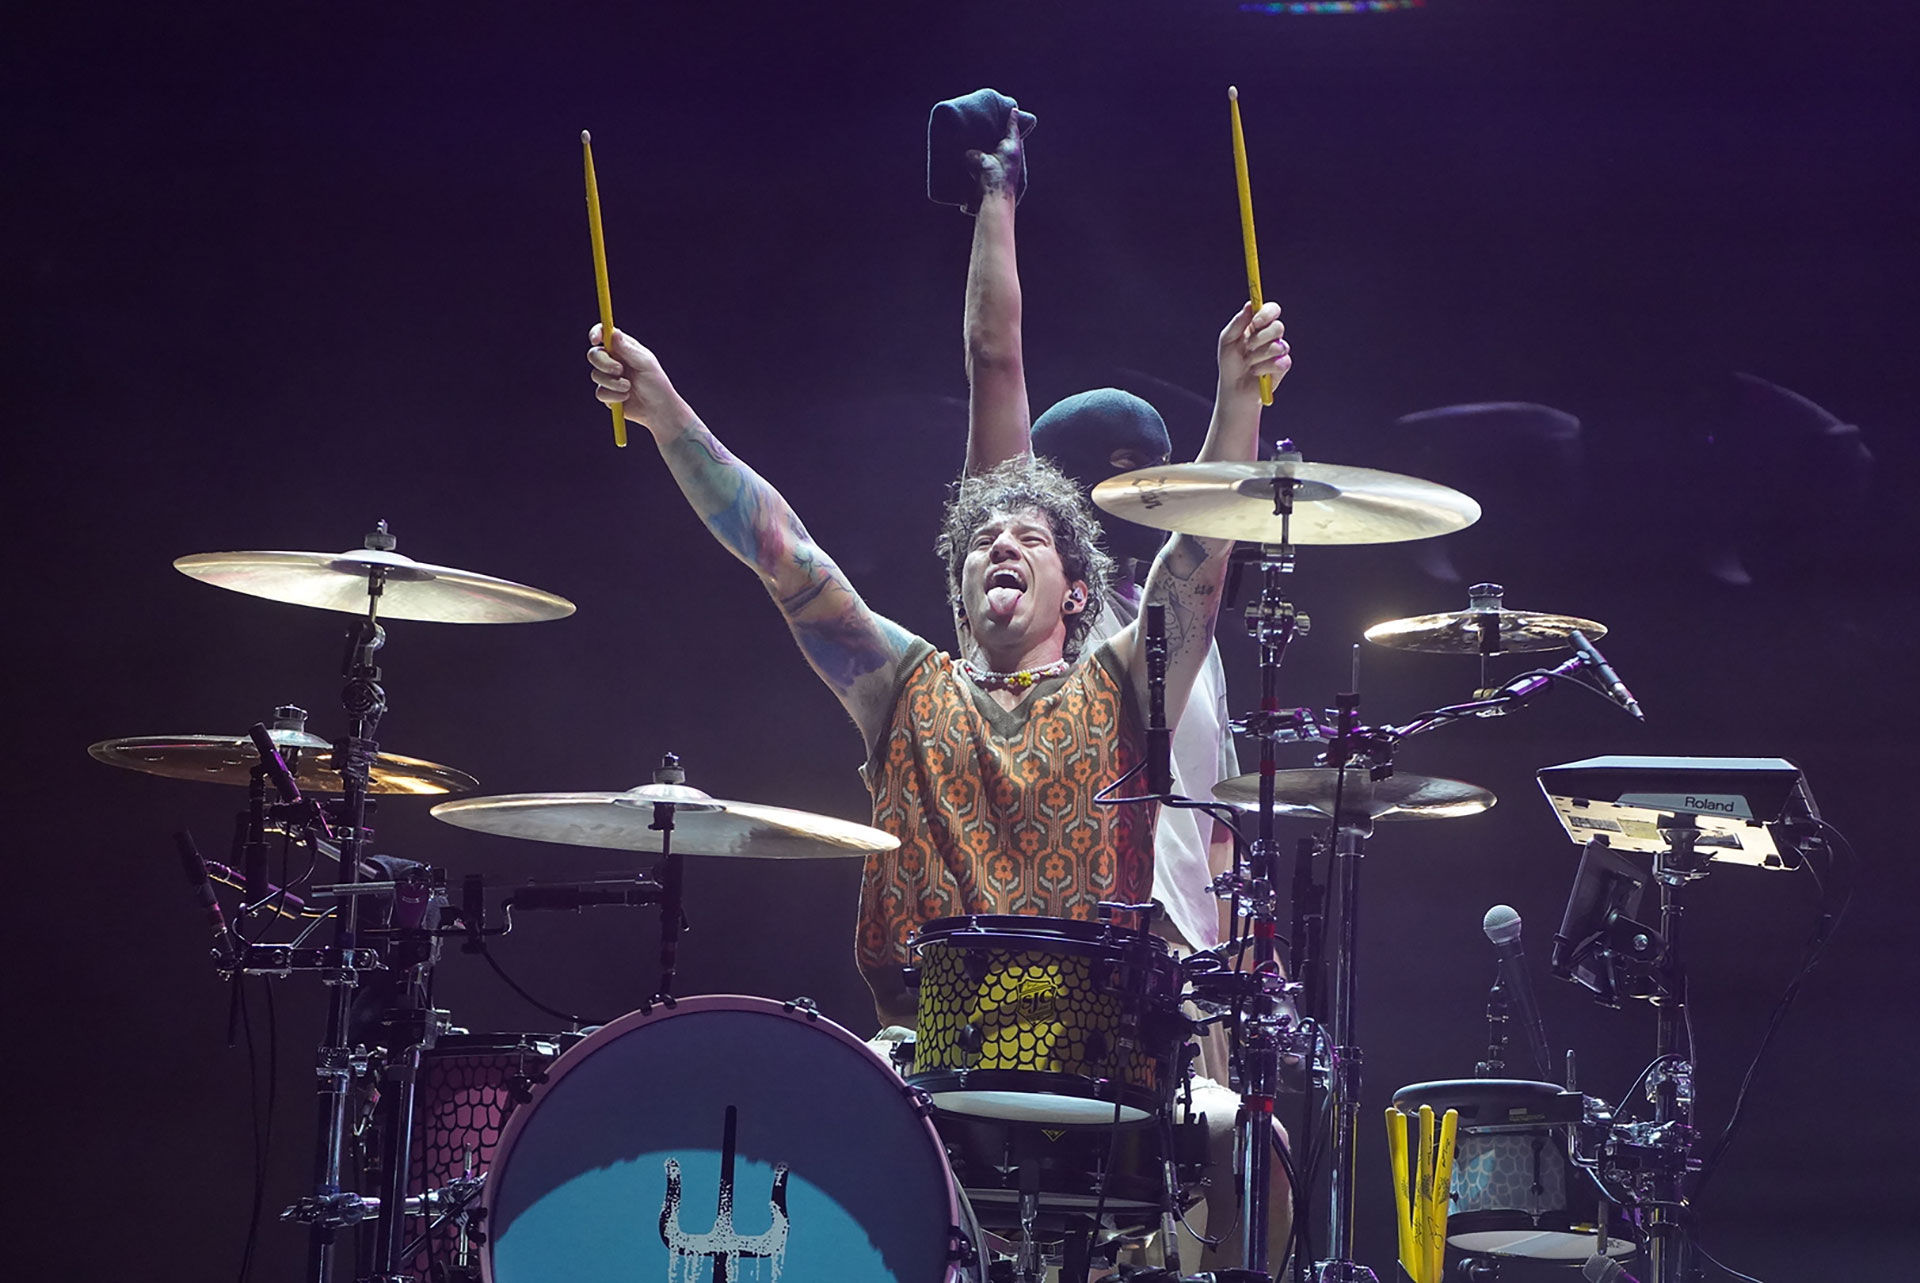 Drummer Josh Dun, the base of the duo that emerged in Ohio